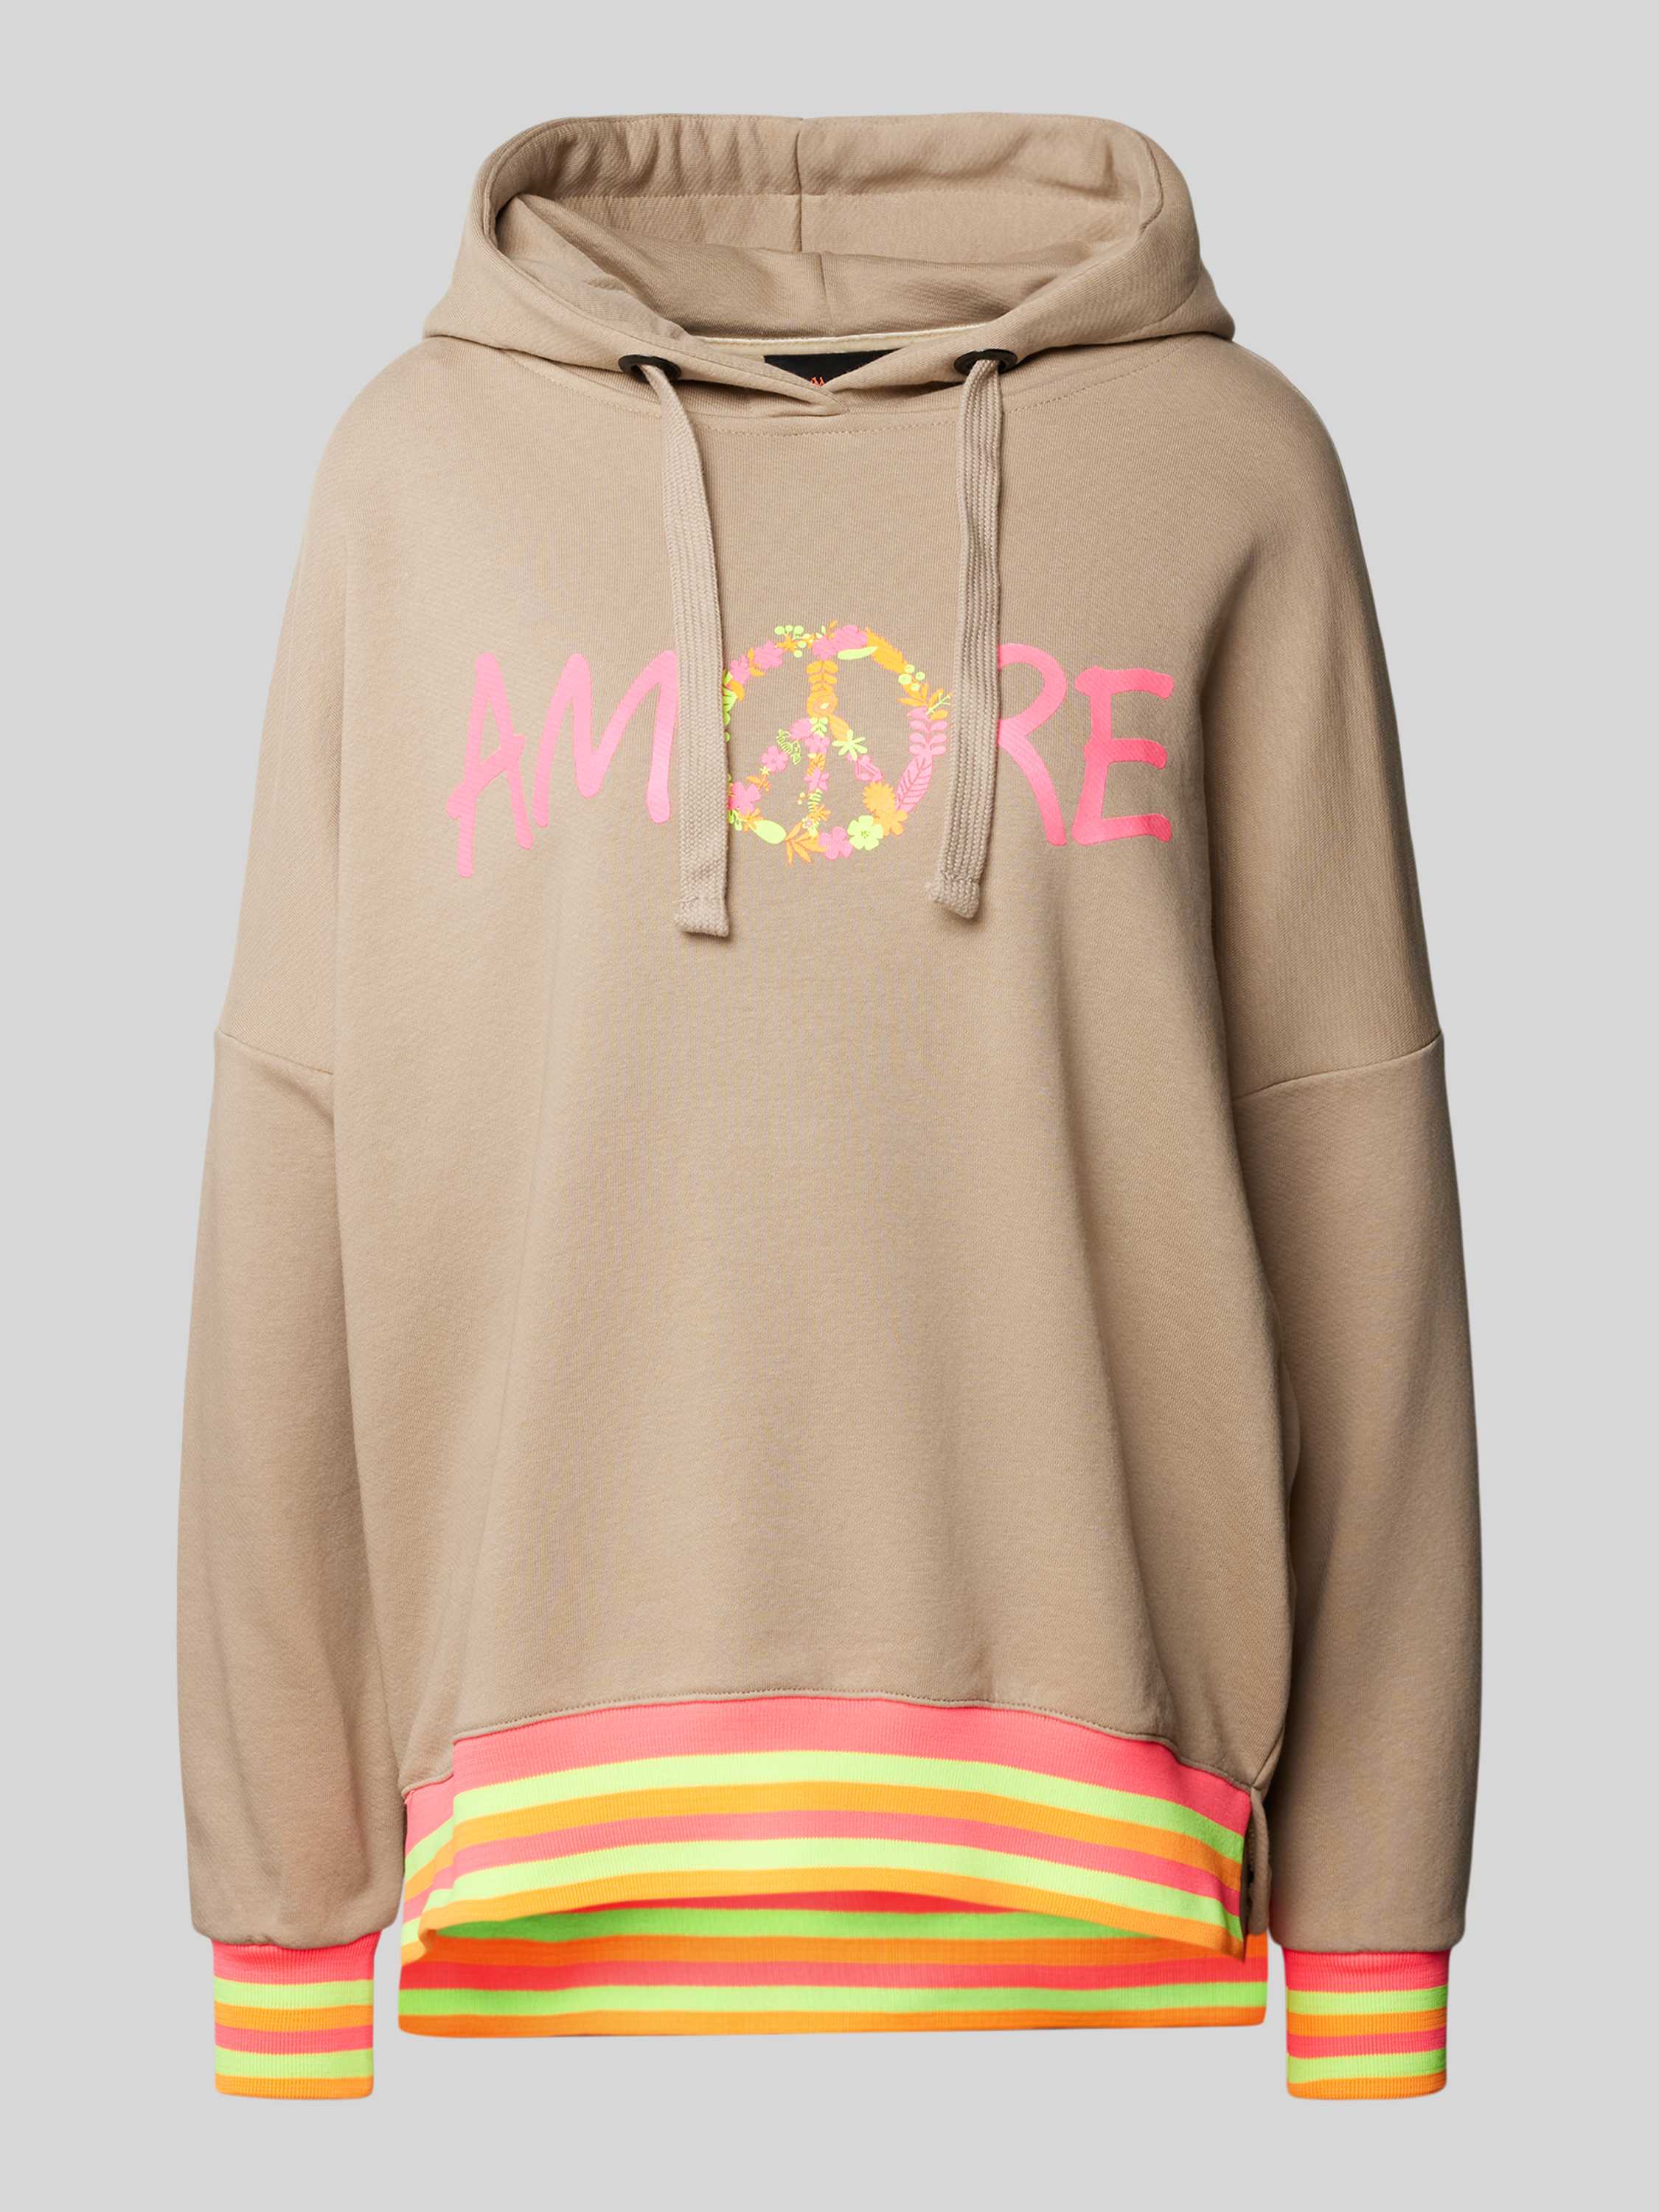 Oversized Hoodie mit Label-Print Modell 'Amore'